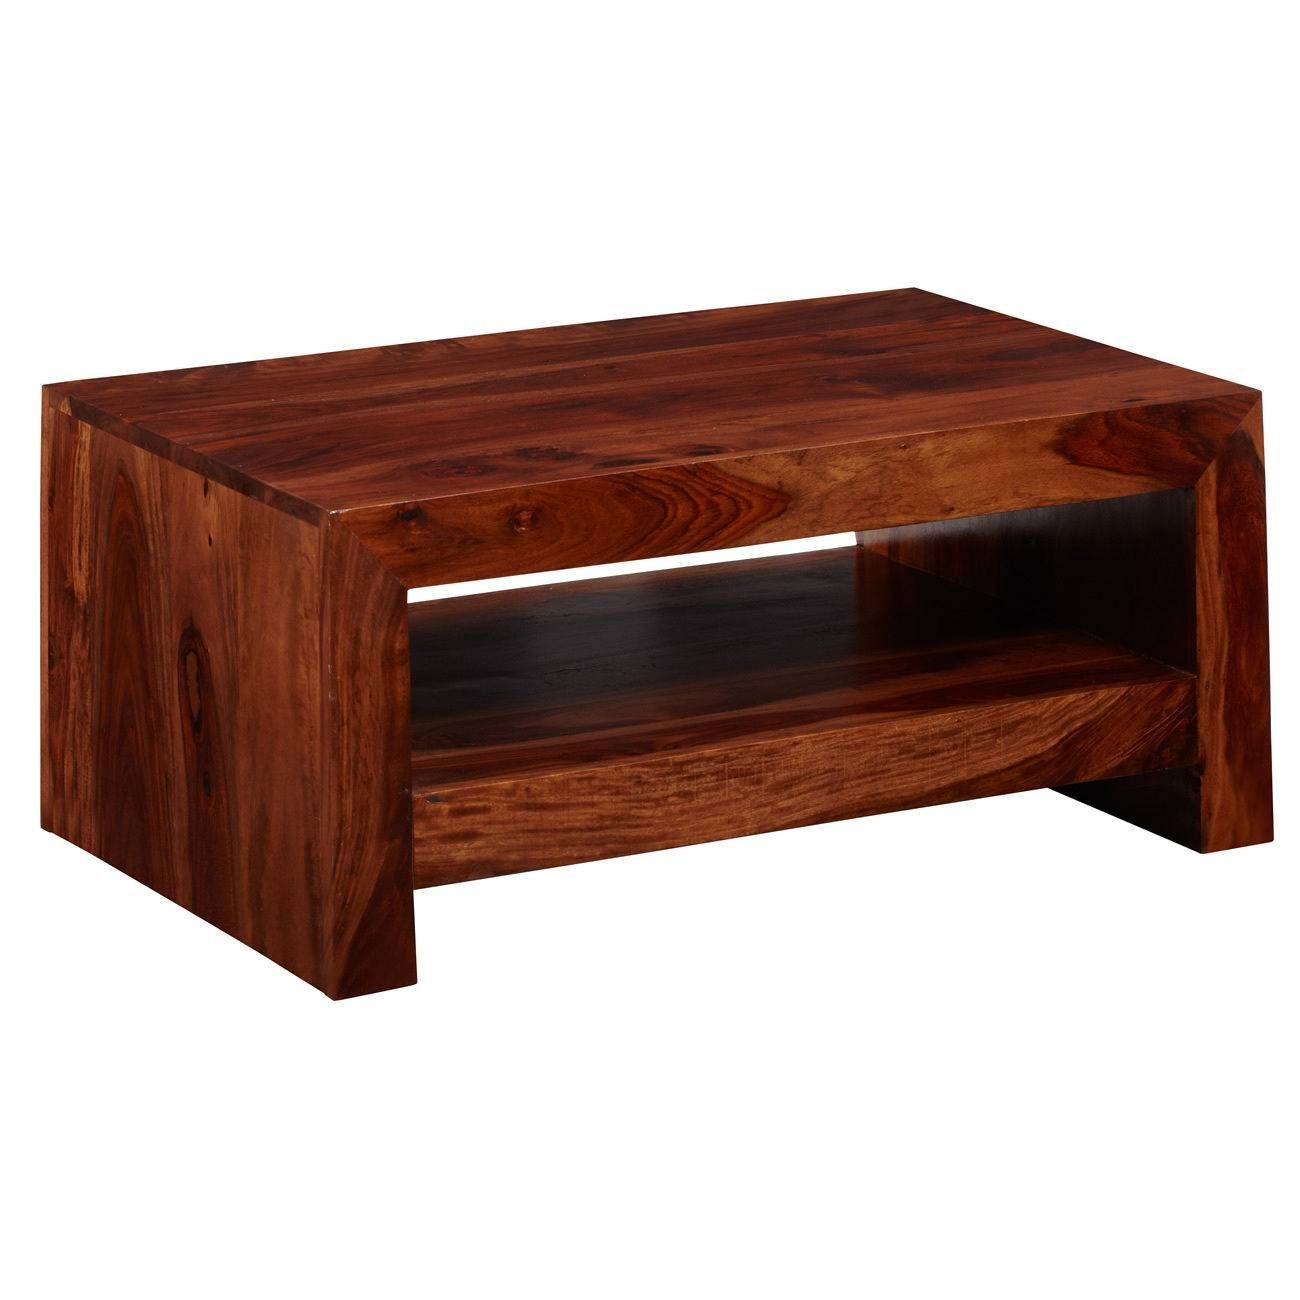 Coffee Tables Ideas: Top Hardwood Coffee Table Plans Wooden Coffee With Regard To Short Coffee Tables (View 12 of 15)